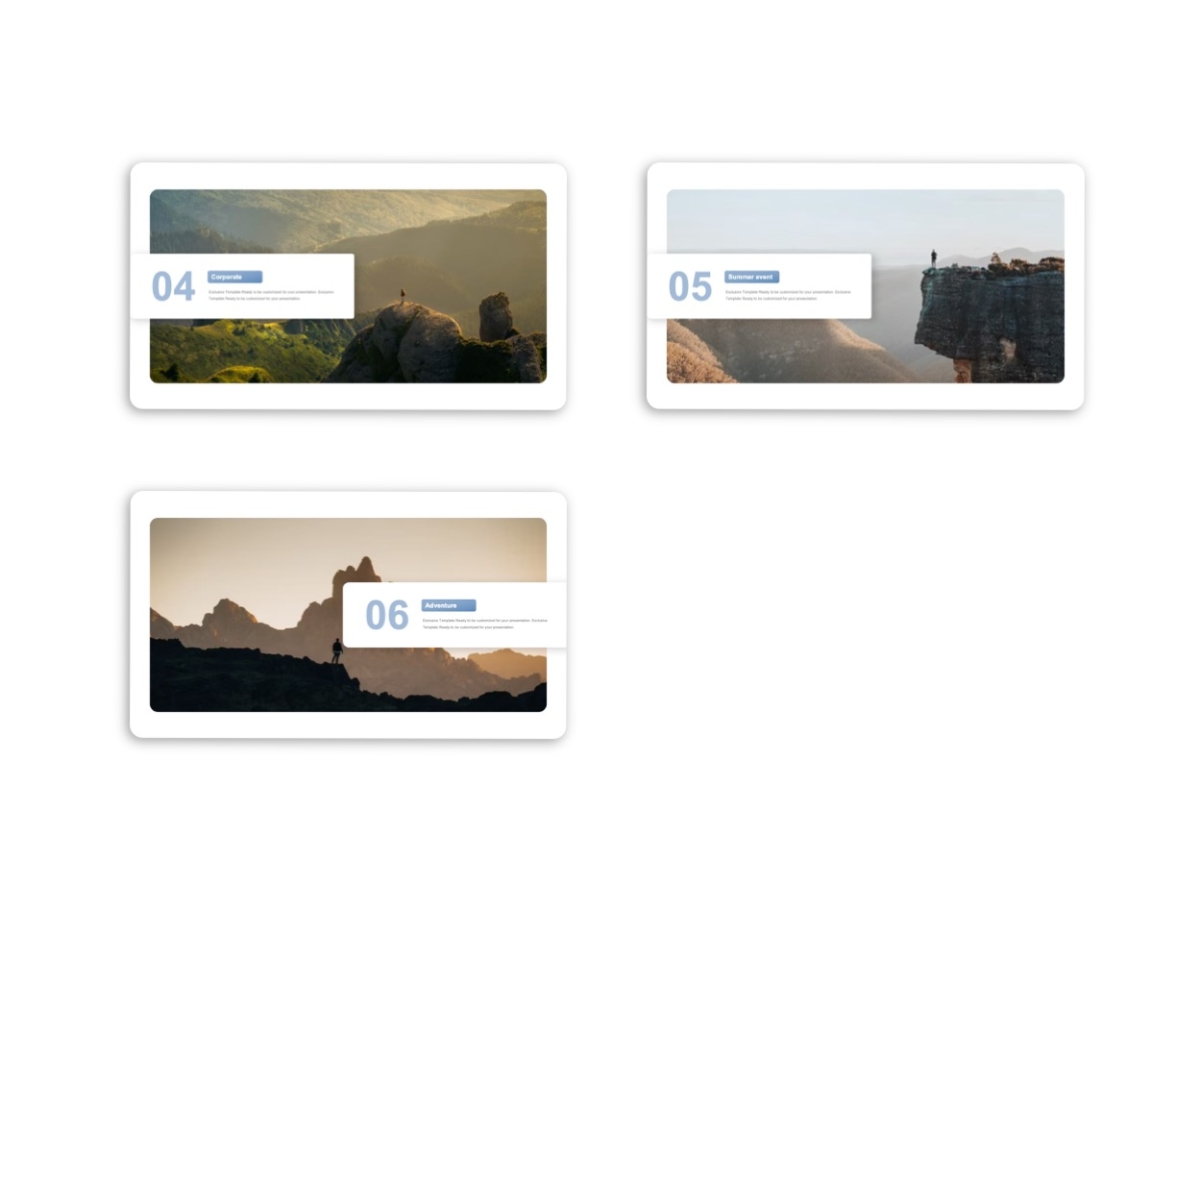 Climbing Club PowerPoint + Easy to Use PowerPoint Template